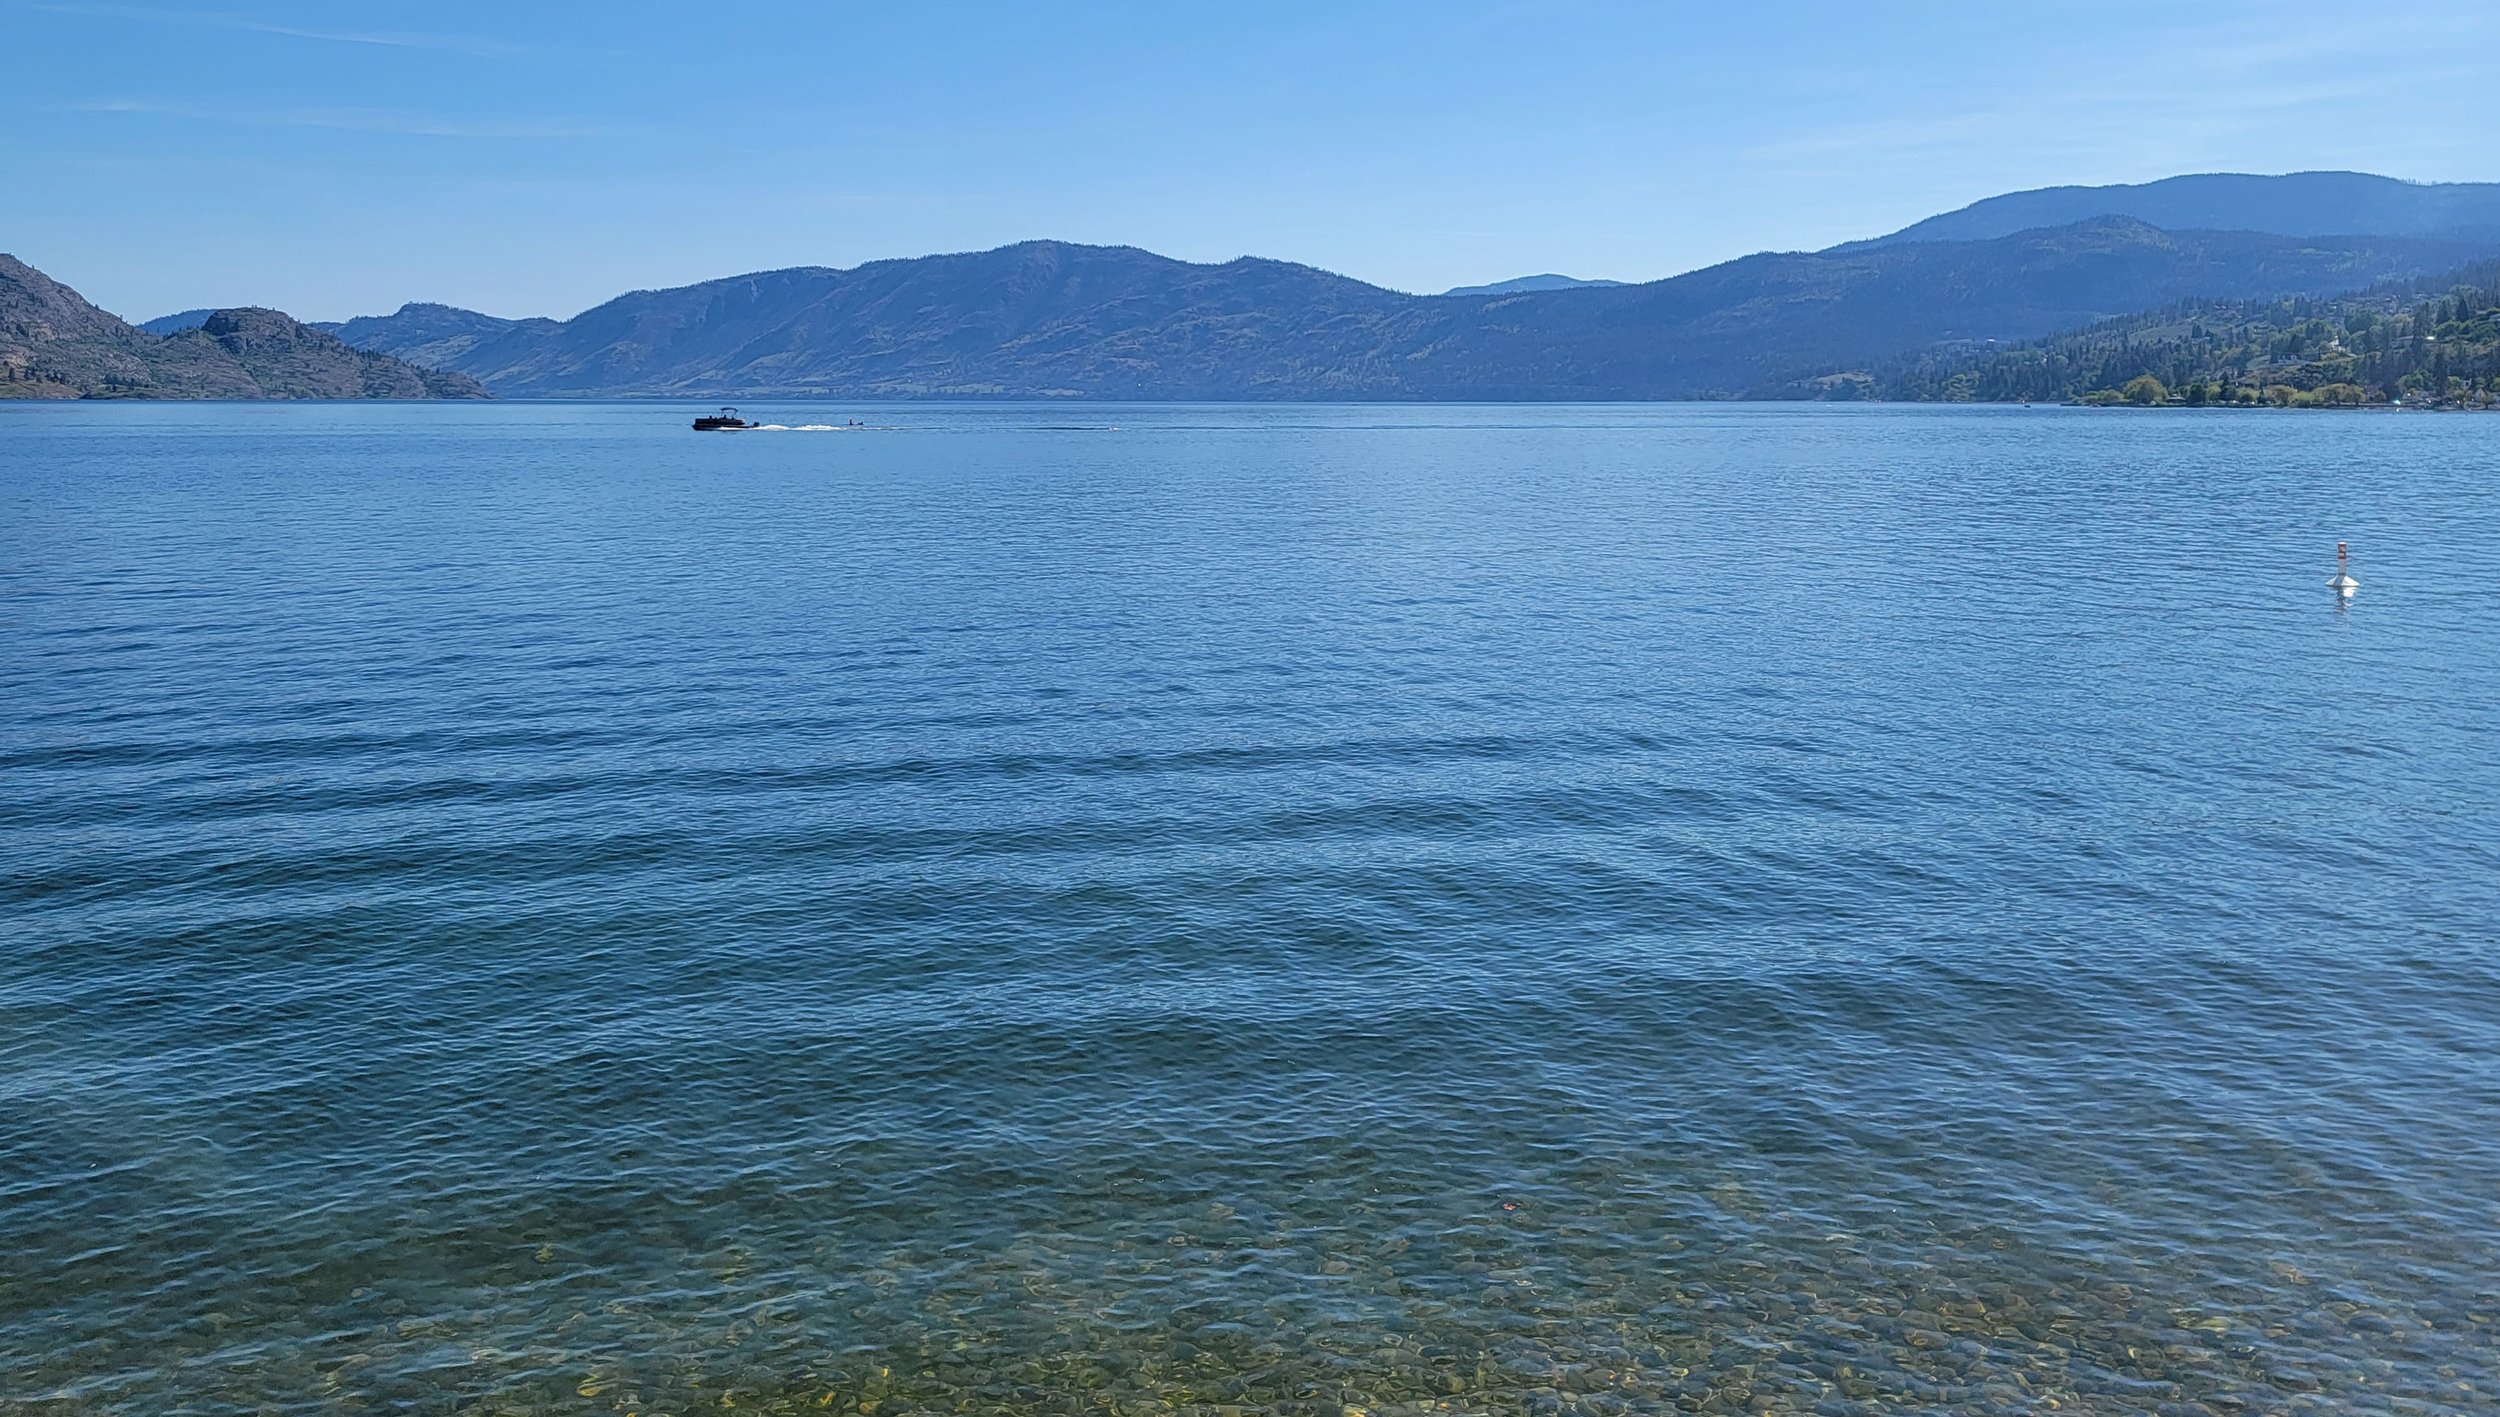 The Okanagan valley has a Southern California climate but with actual water.